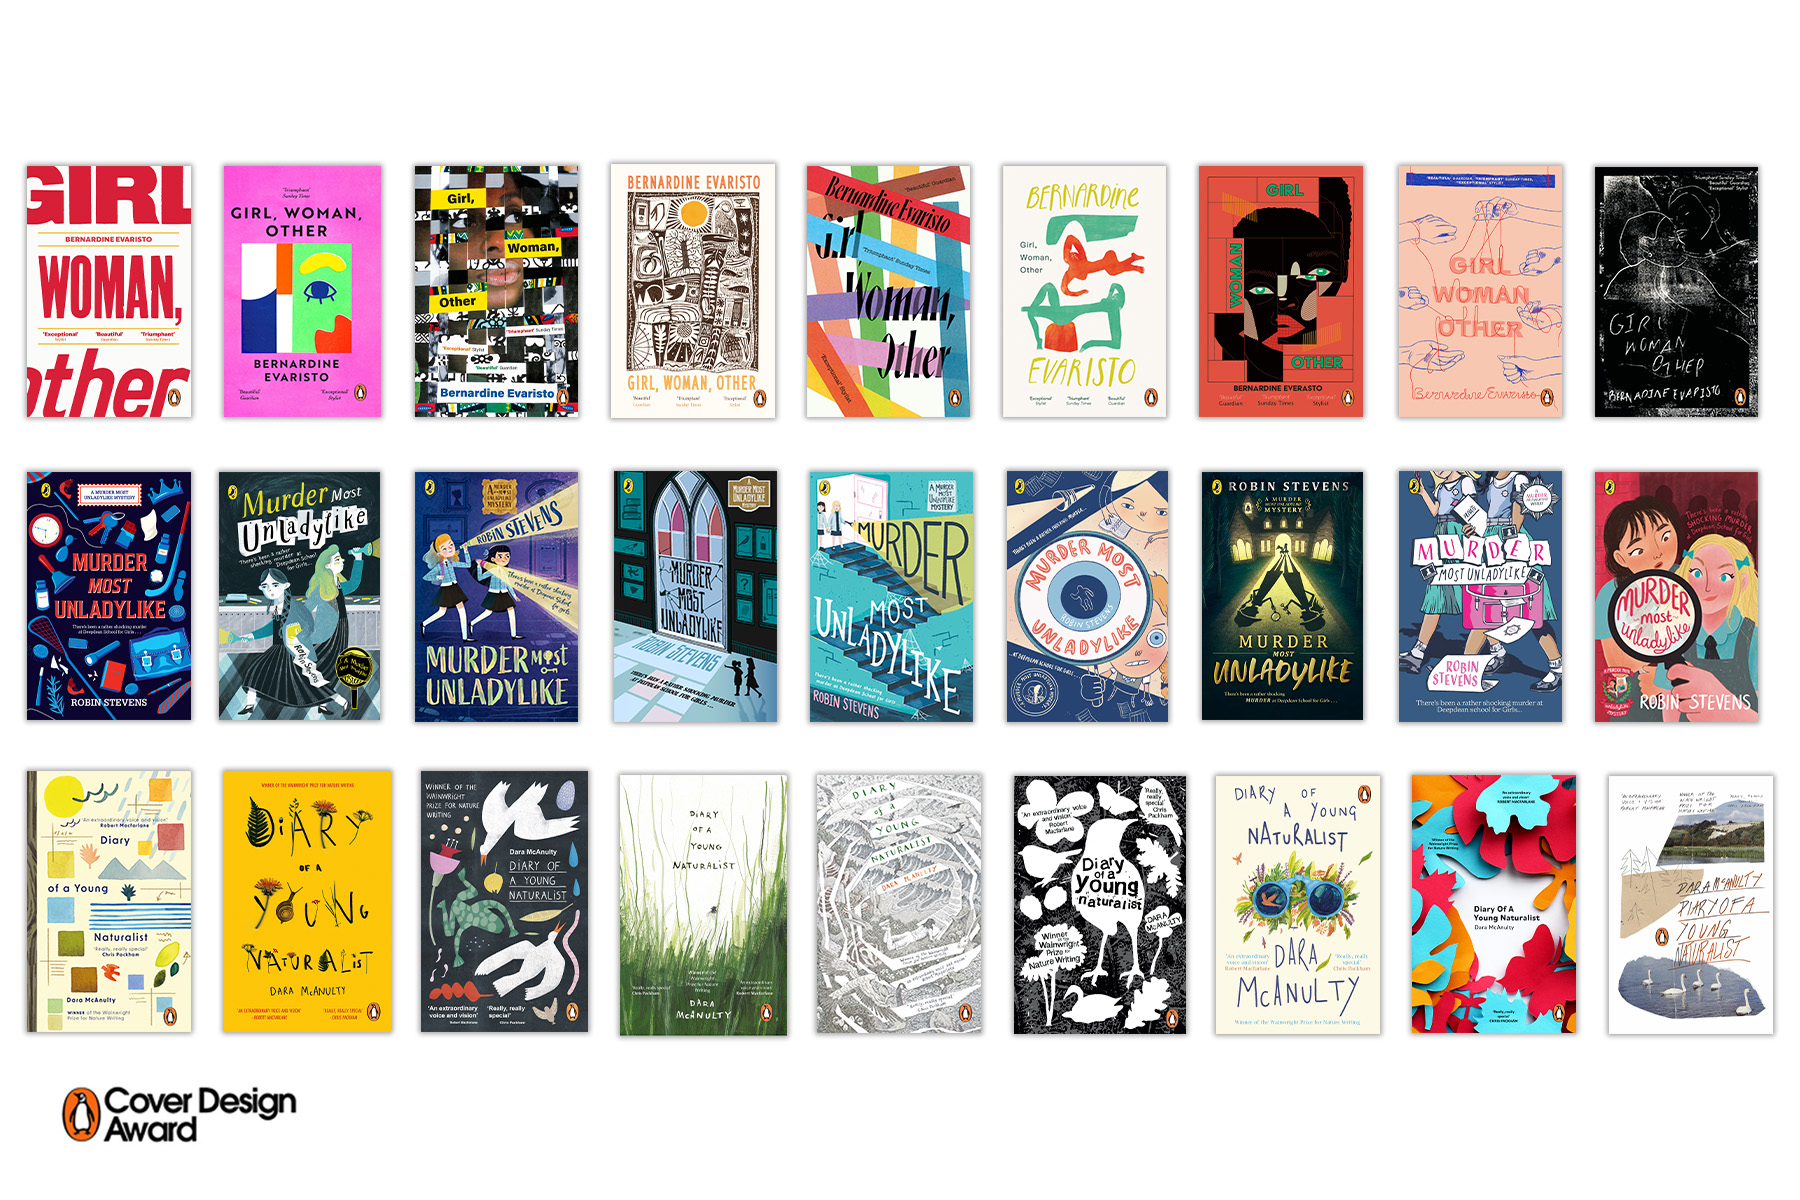 Shortlisted Cover Design Award book cover designs 2022